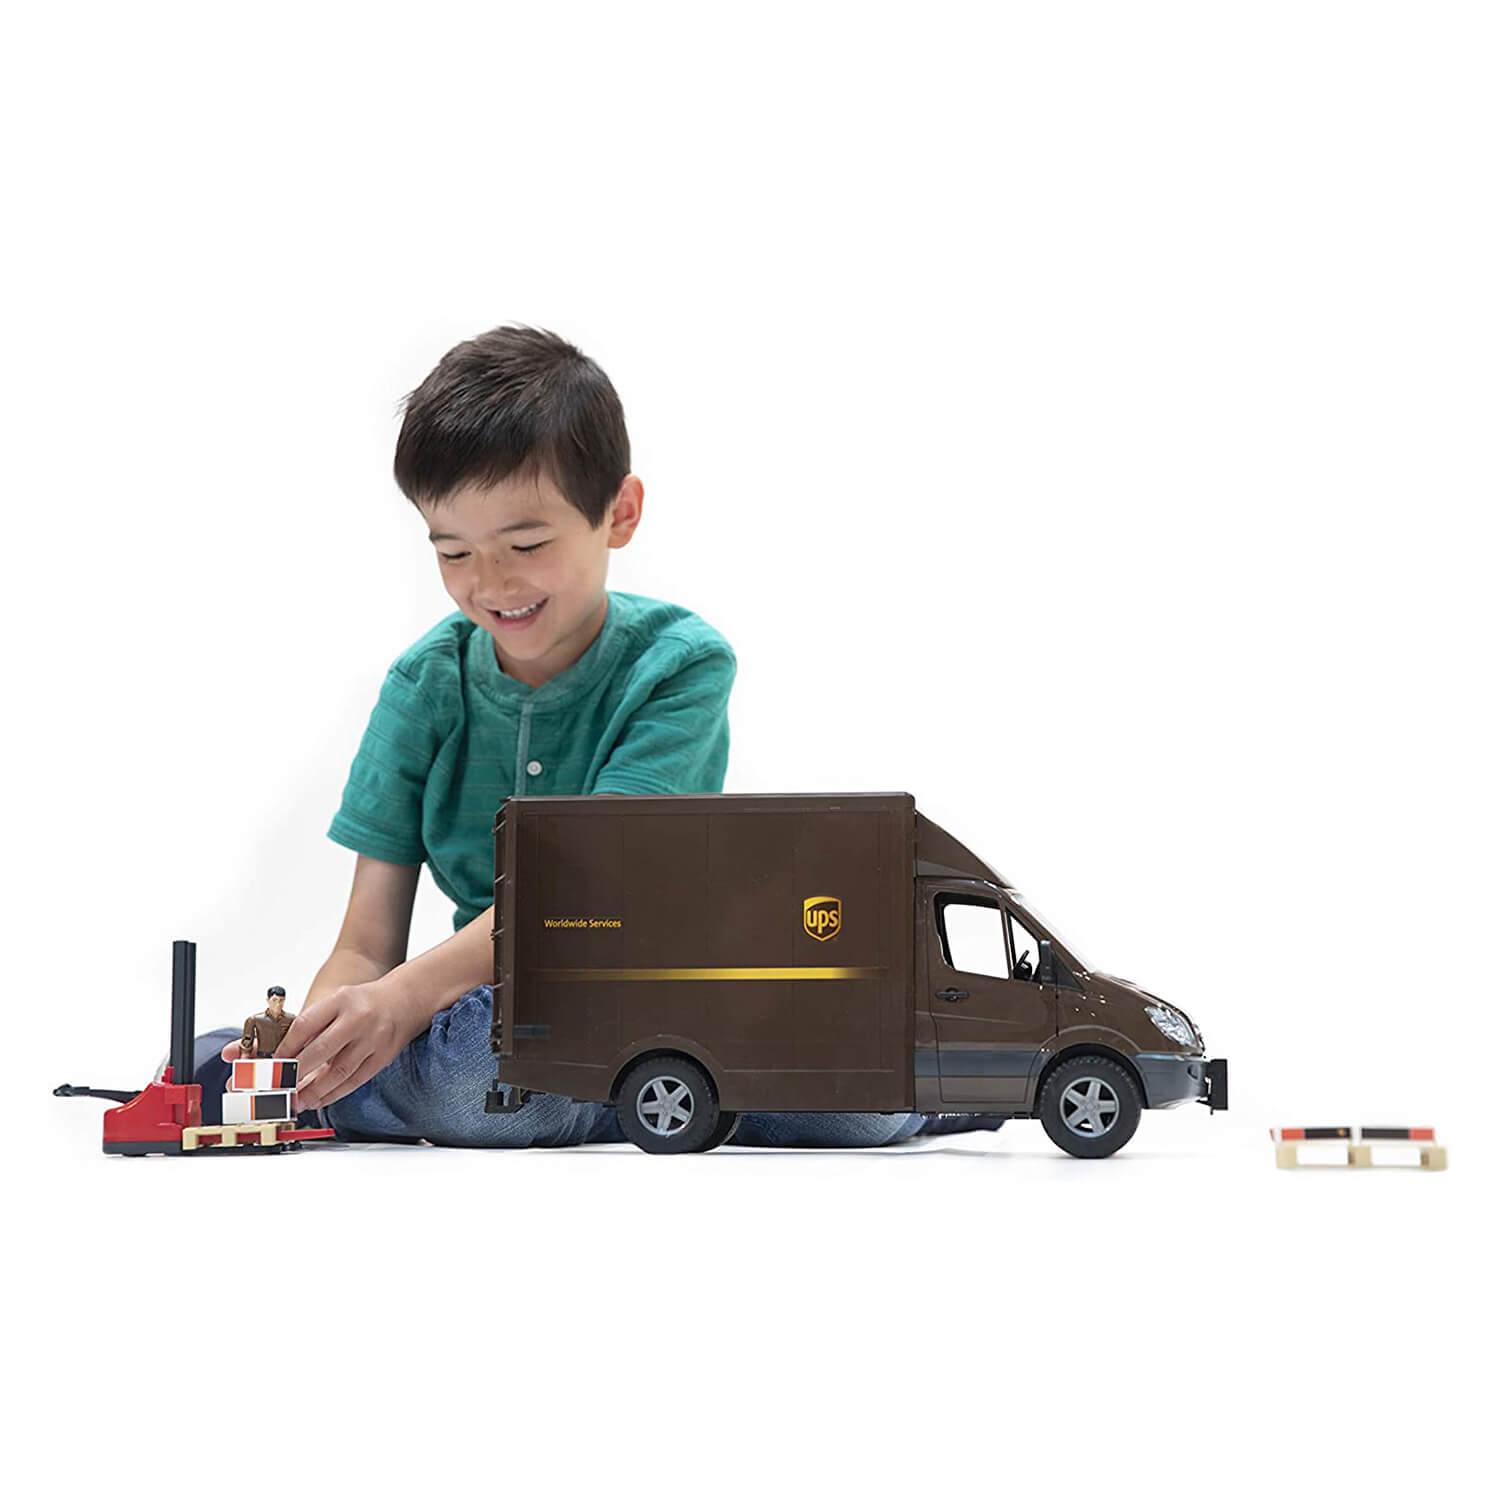 Kid playing with the mercedes-benz toy.